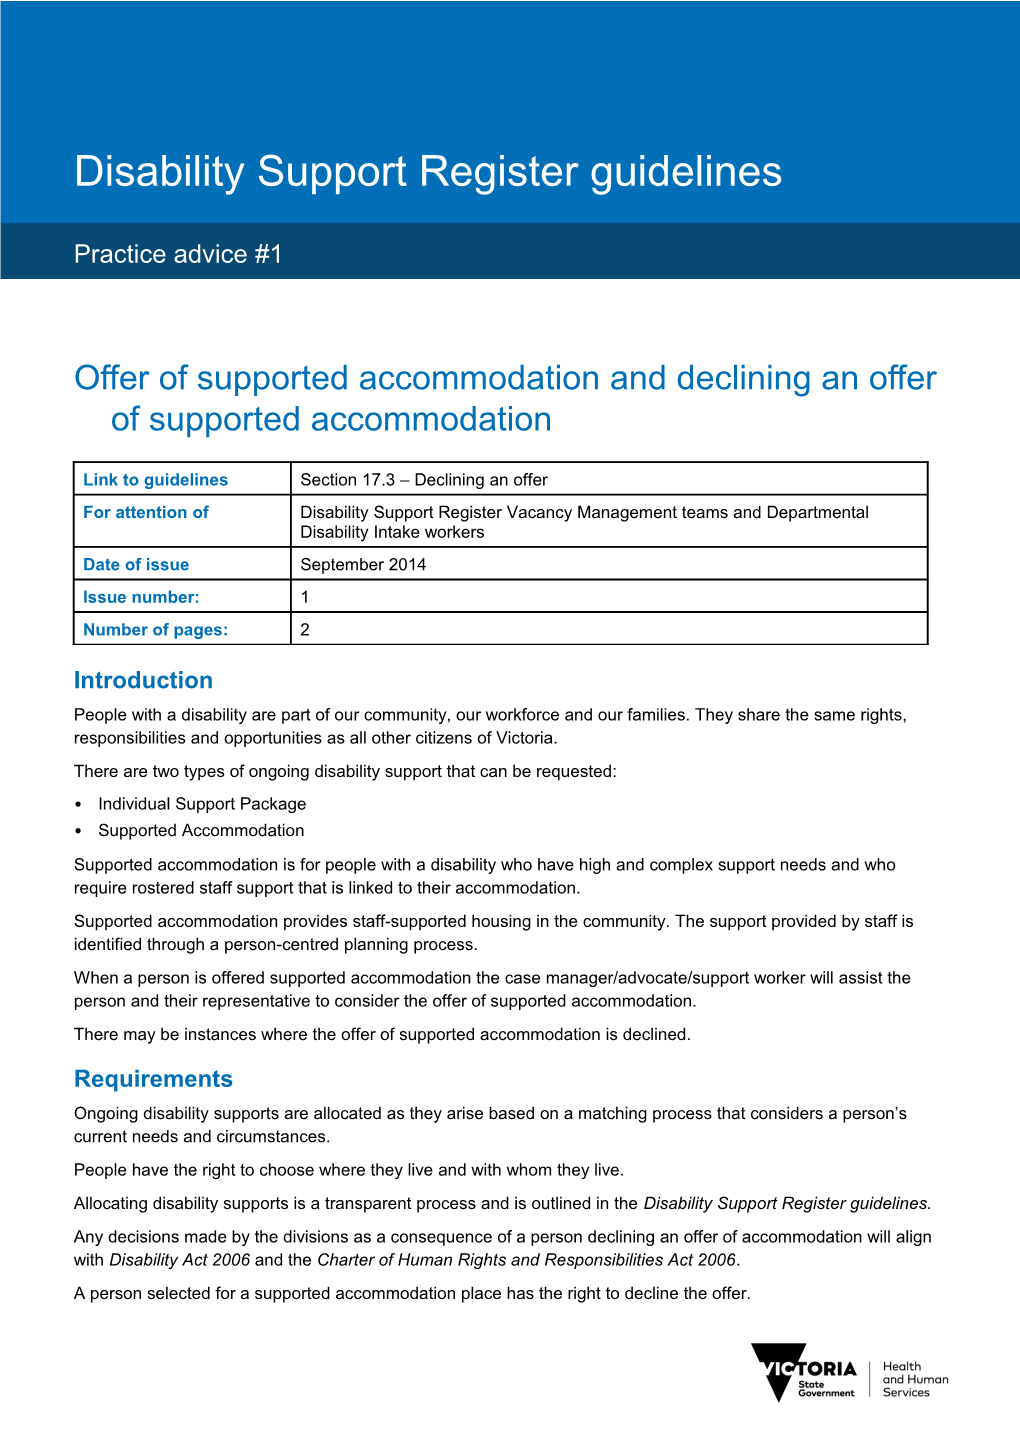 Practice Advice #1 - Offer of Supported Accommodation and Declining an Offer